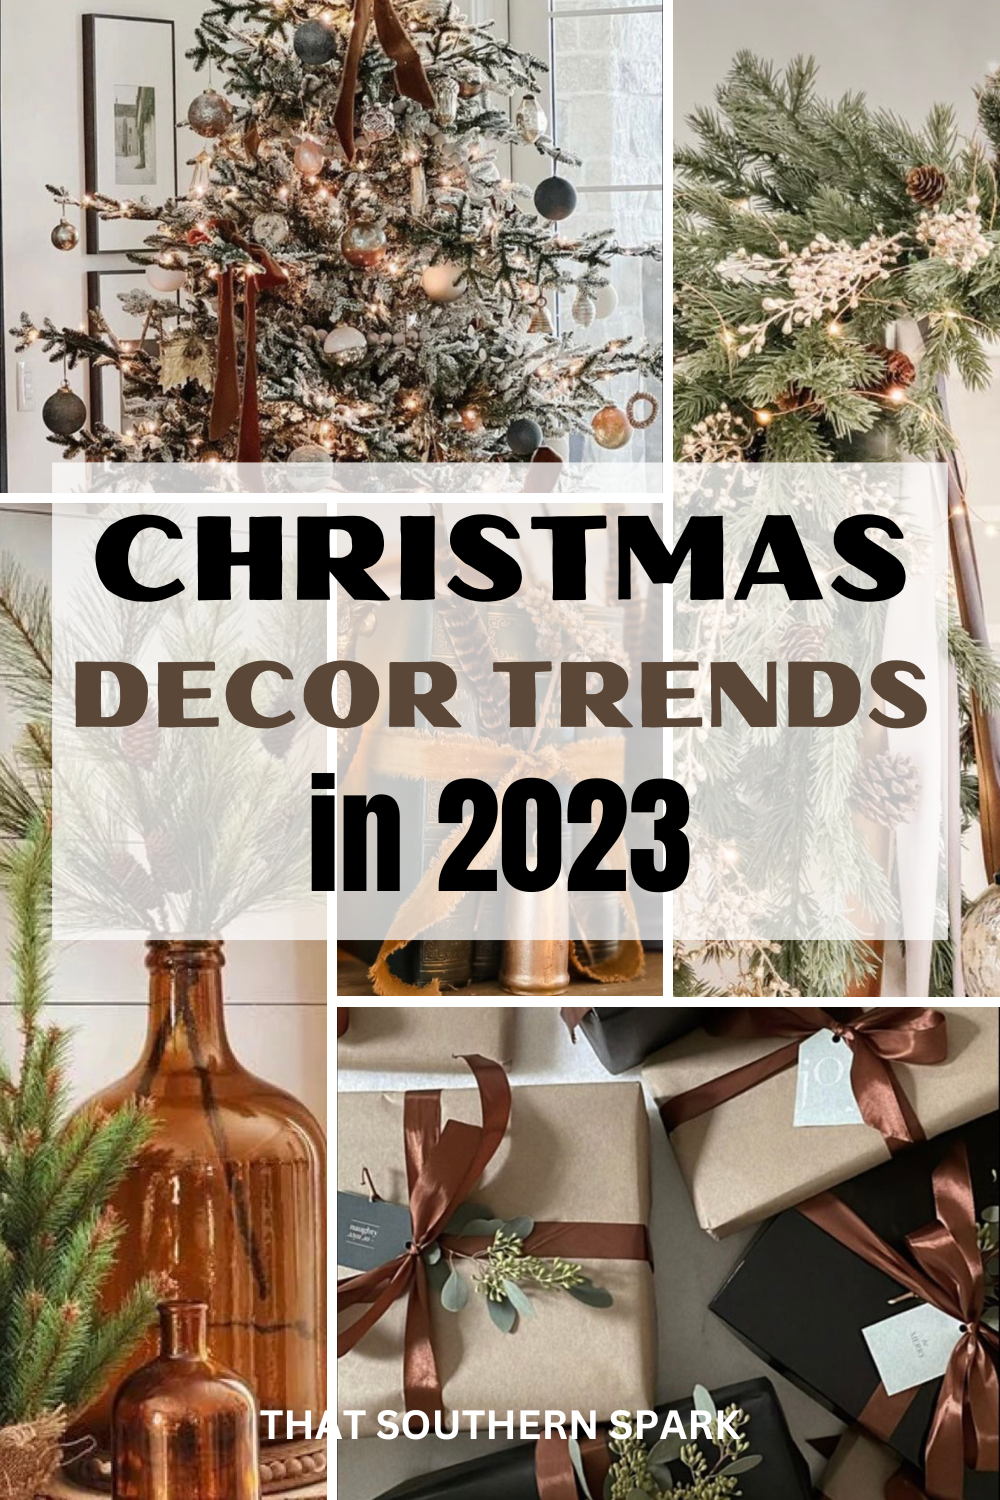 Christmas decor trends in 2023